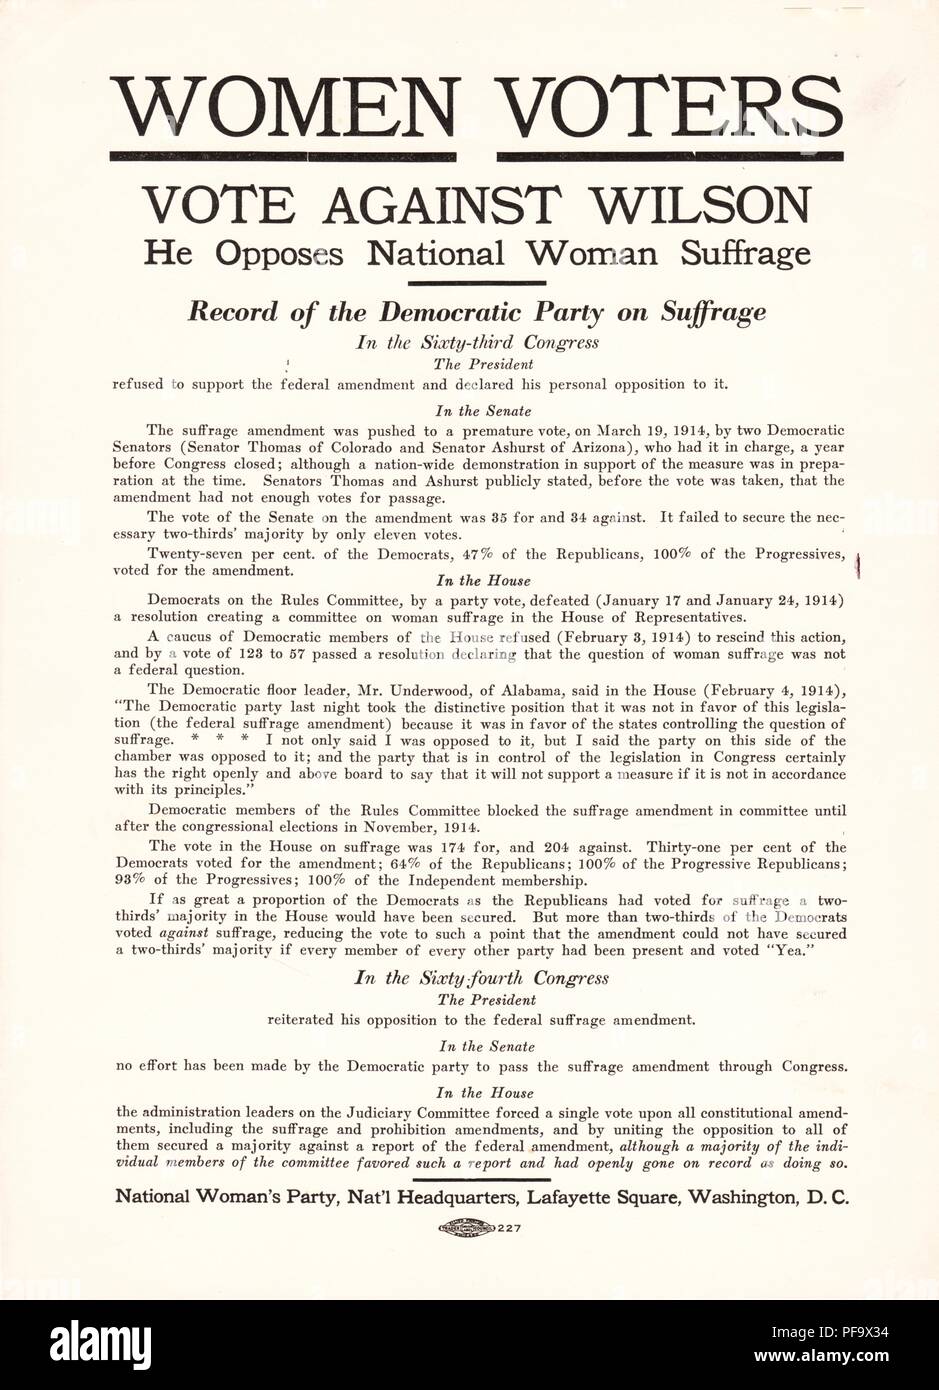 Suffrage campaign leaflet, advocating against Thomas Woodrow Wilson and the Democratic Party in light of their perceived failures regarding women's suffrage, published by Alice Paul's National Woman's Party, in Washington, DC, 1914. () Stock Photo